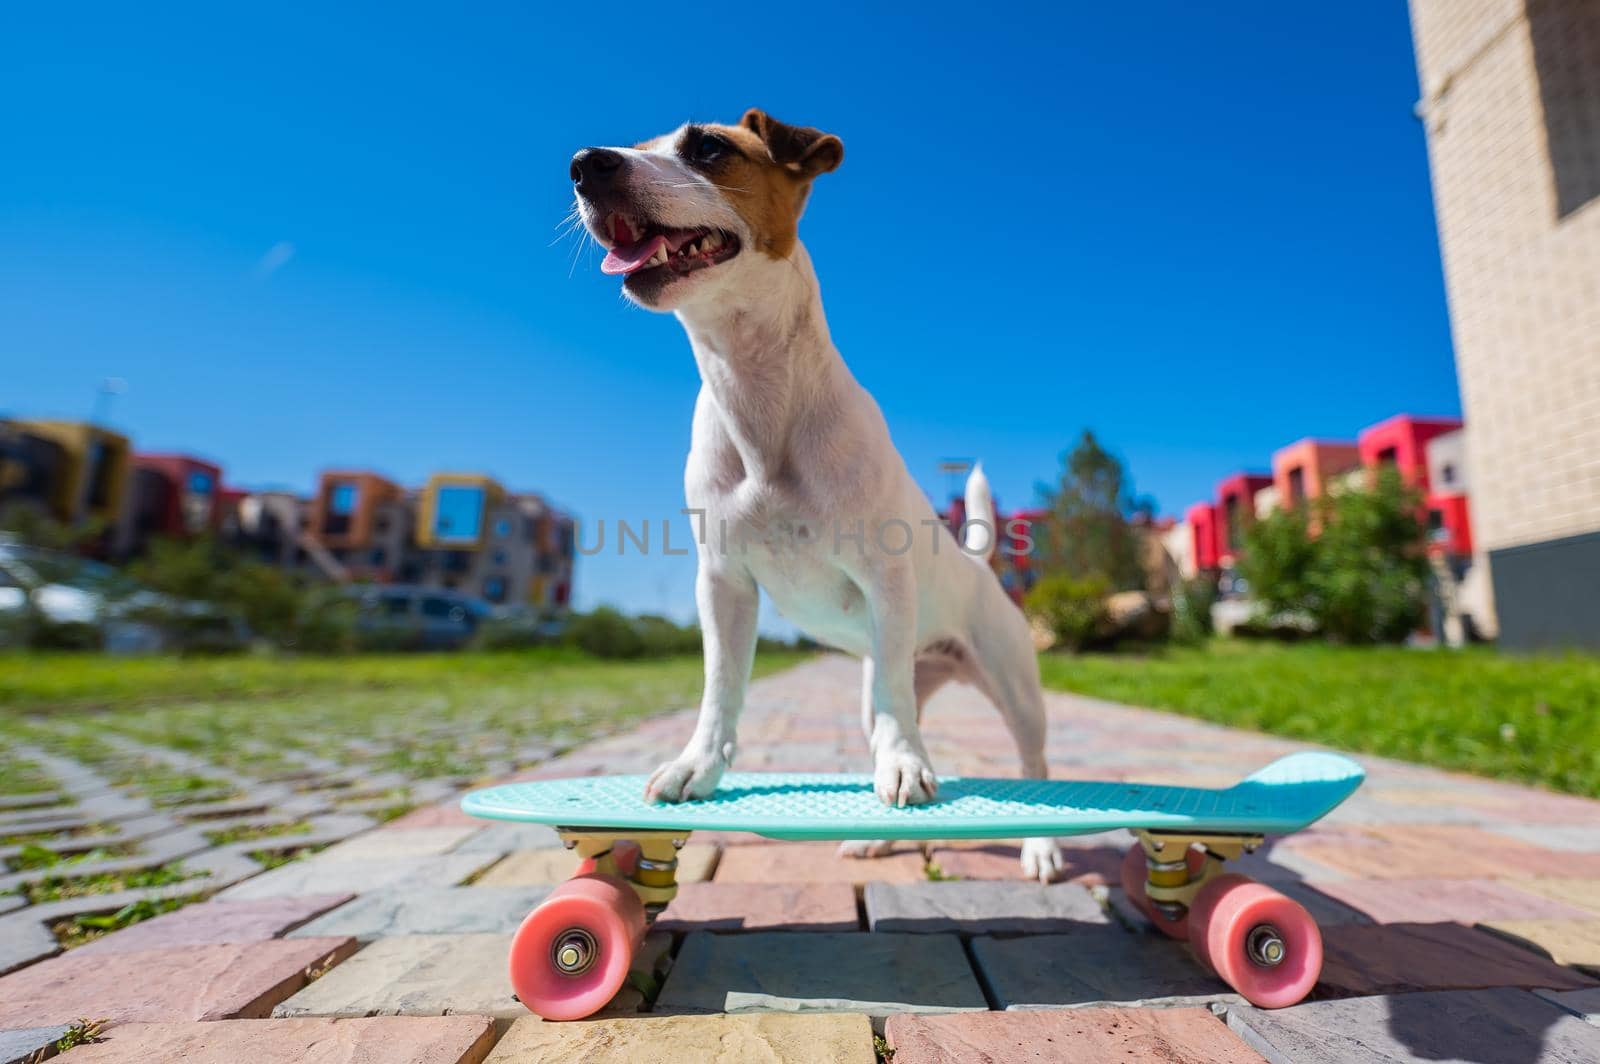 Jack russell terrier dog rides a skateboard outdoors on a hot summer day. by mrwed54